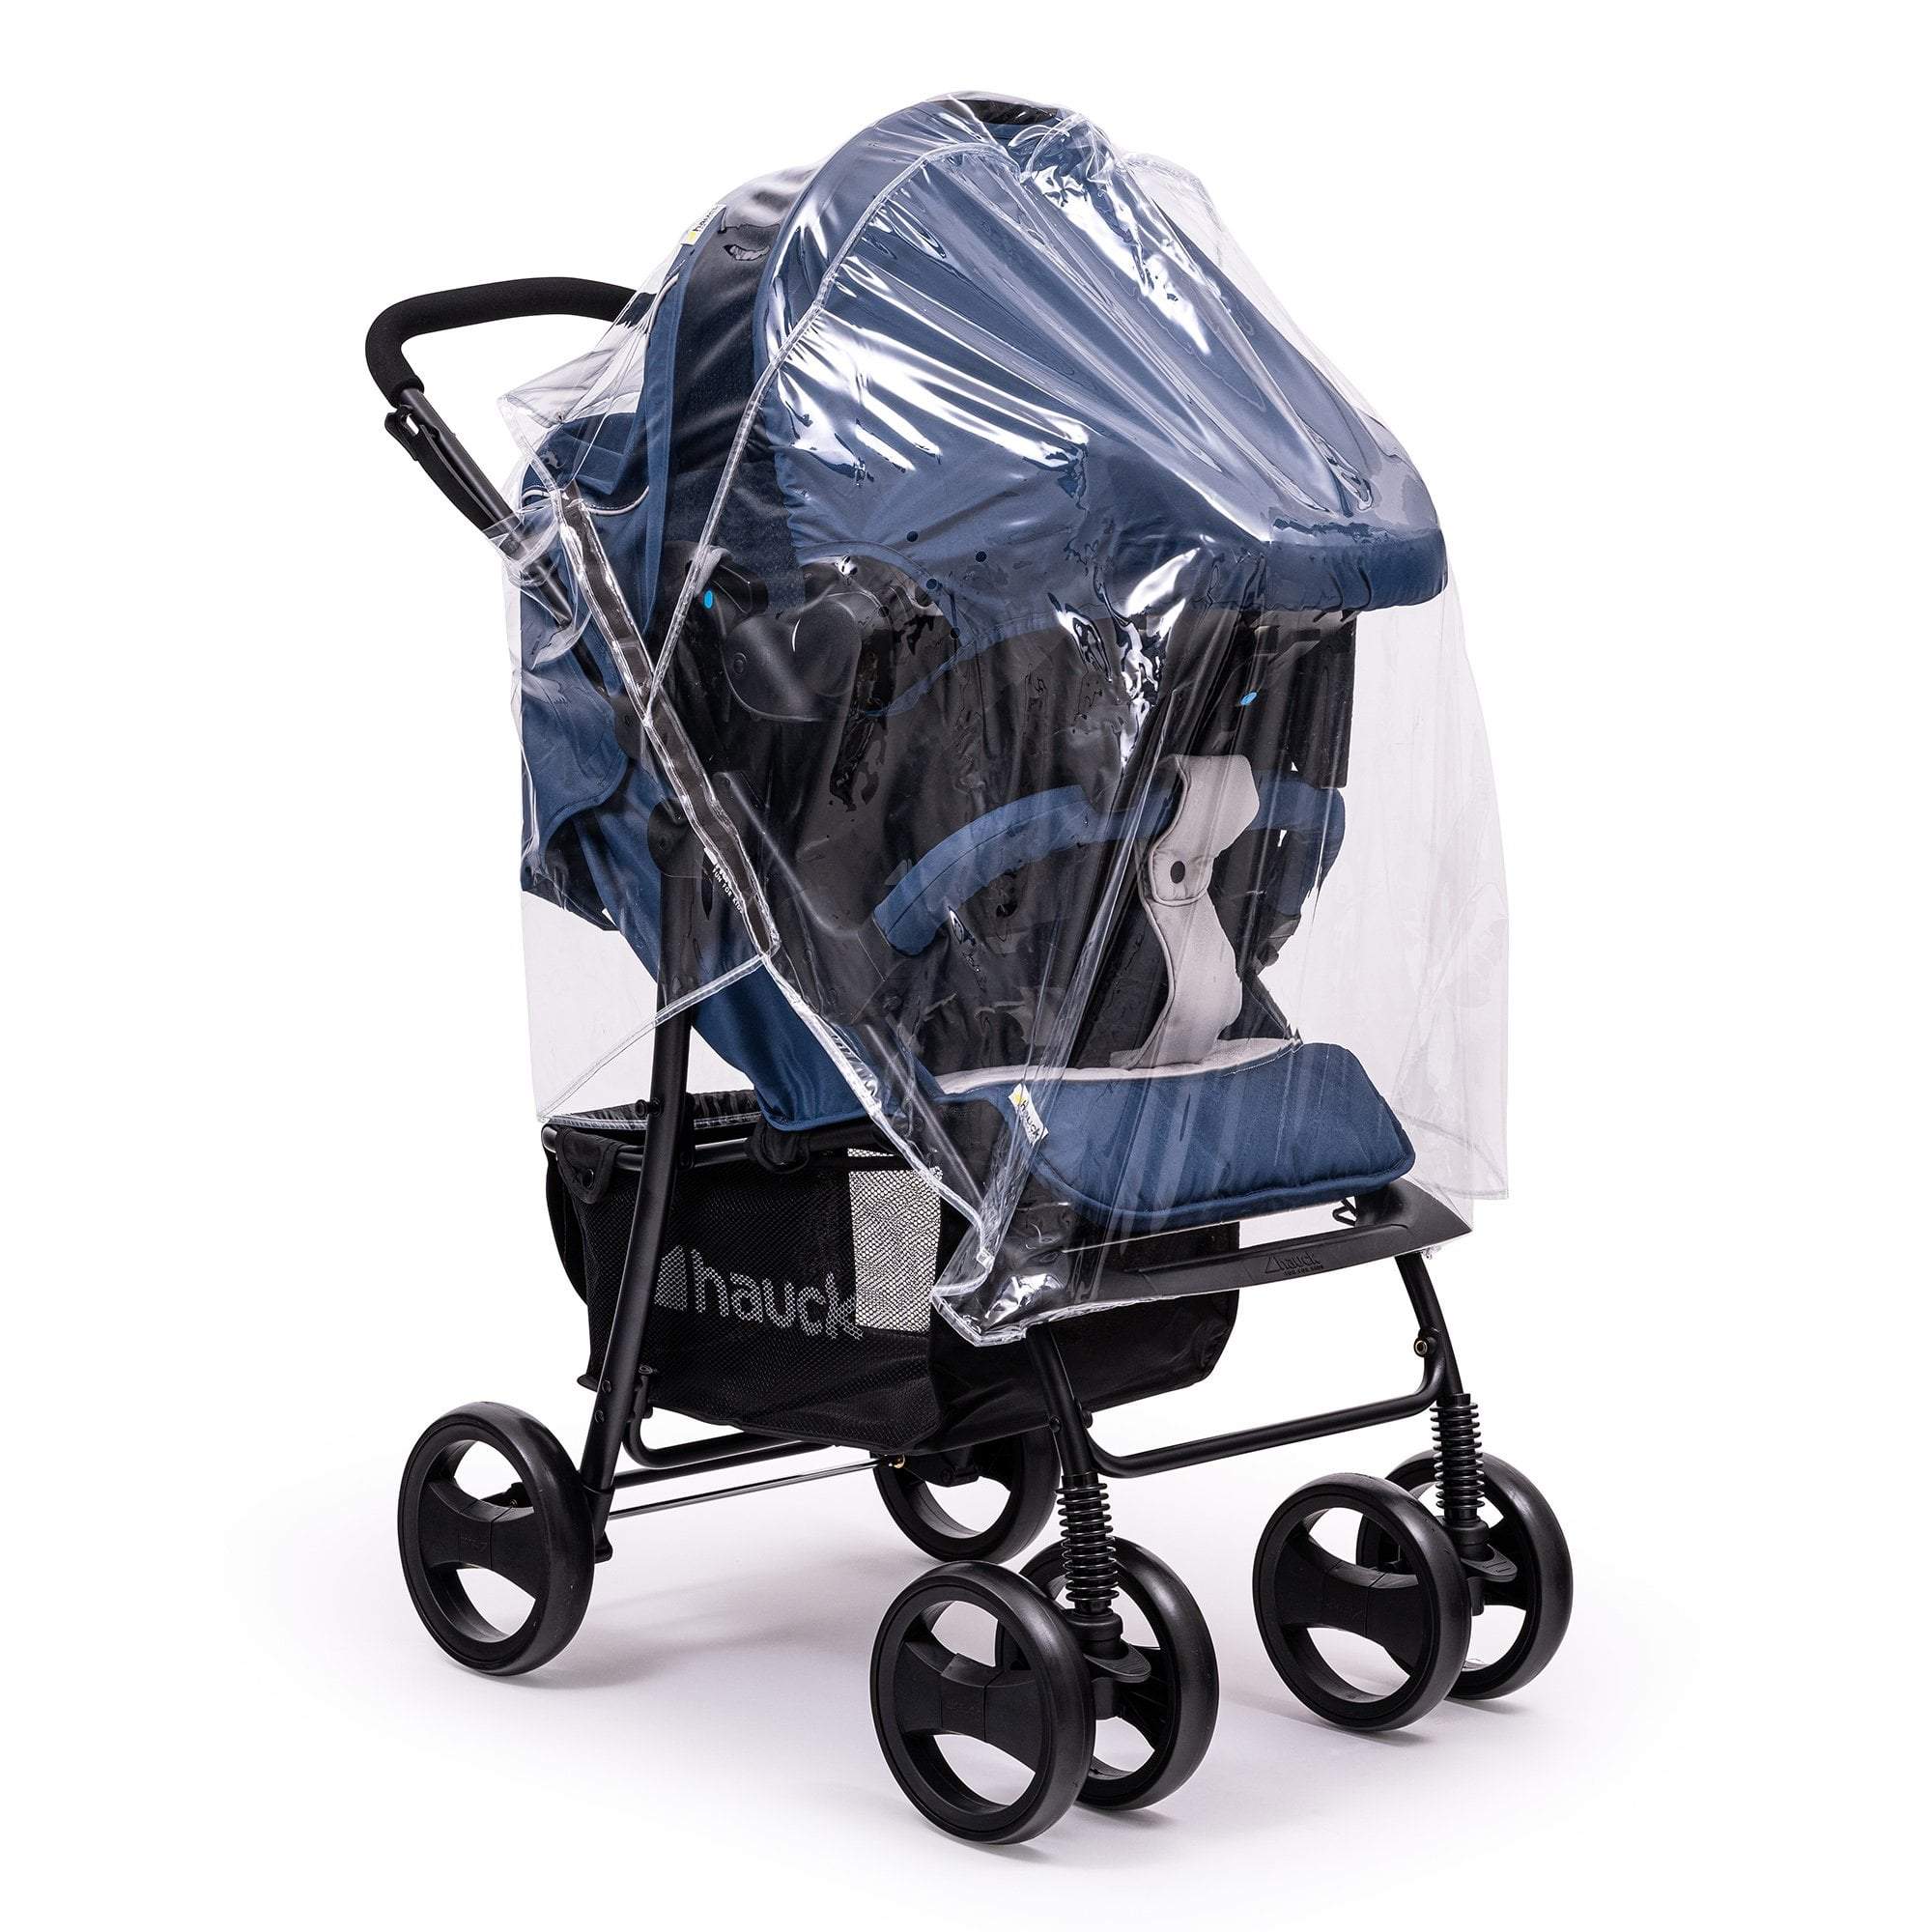 Travel System Raincover Compatible with Kiddicare - Fits All Models - For Your Little One